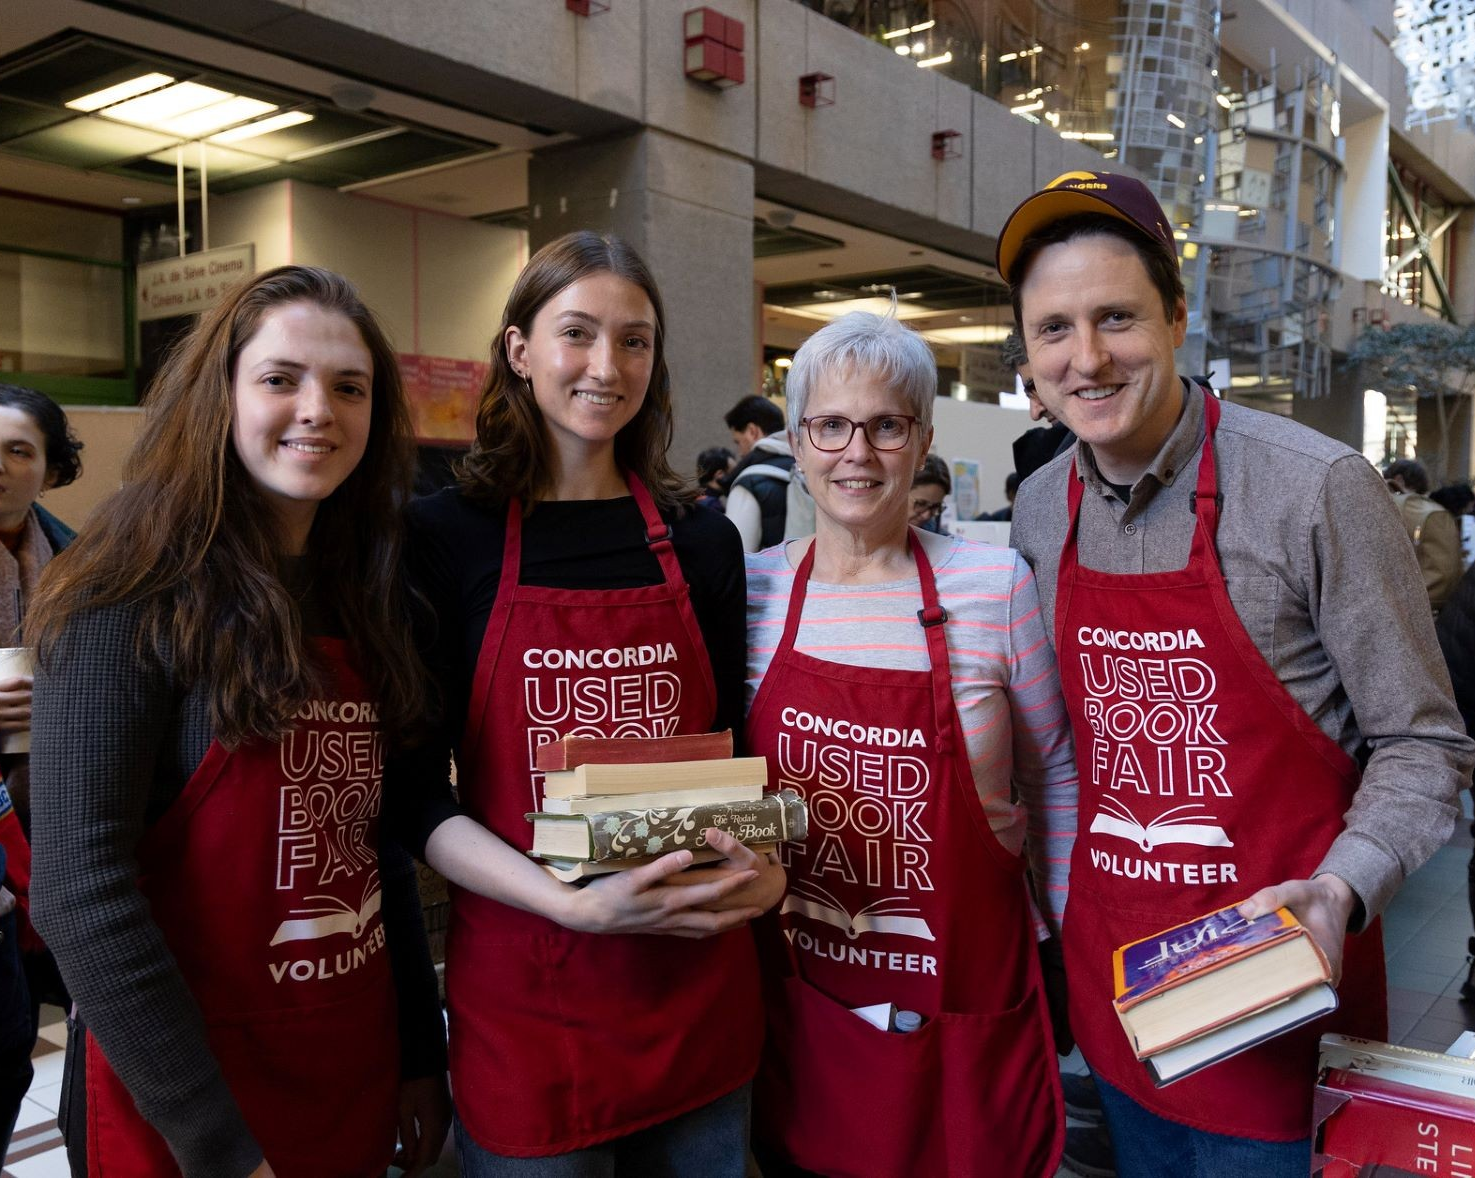 Another bestseller: Volunteers raise $43,635 for Concordia students!